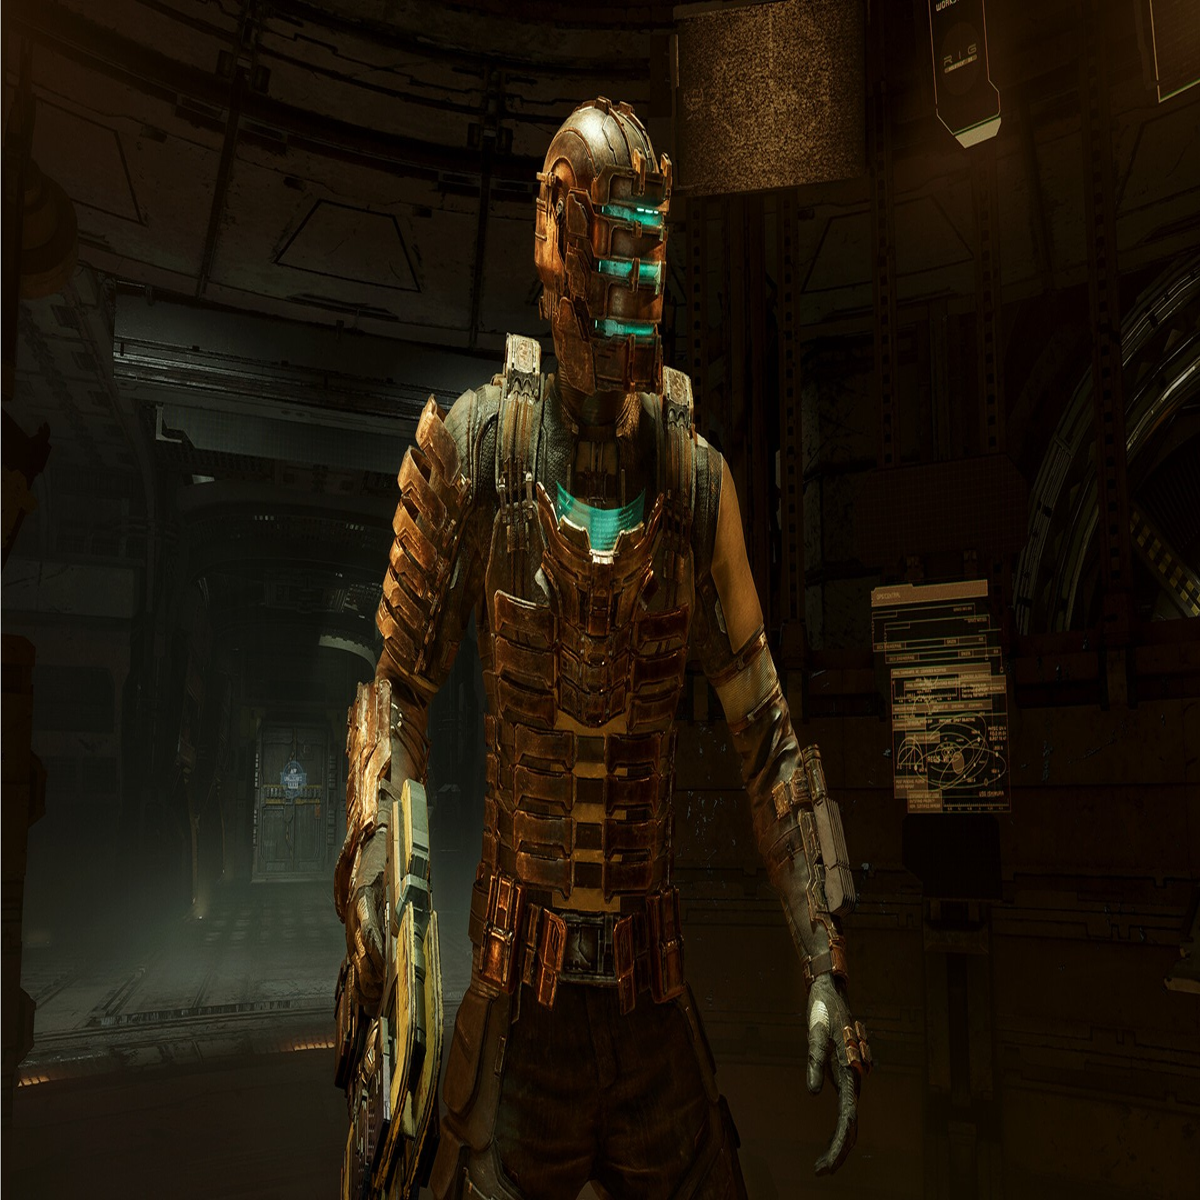 Dead Space guide and everything you need to know